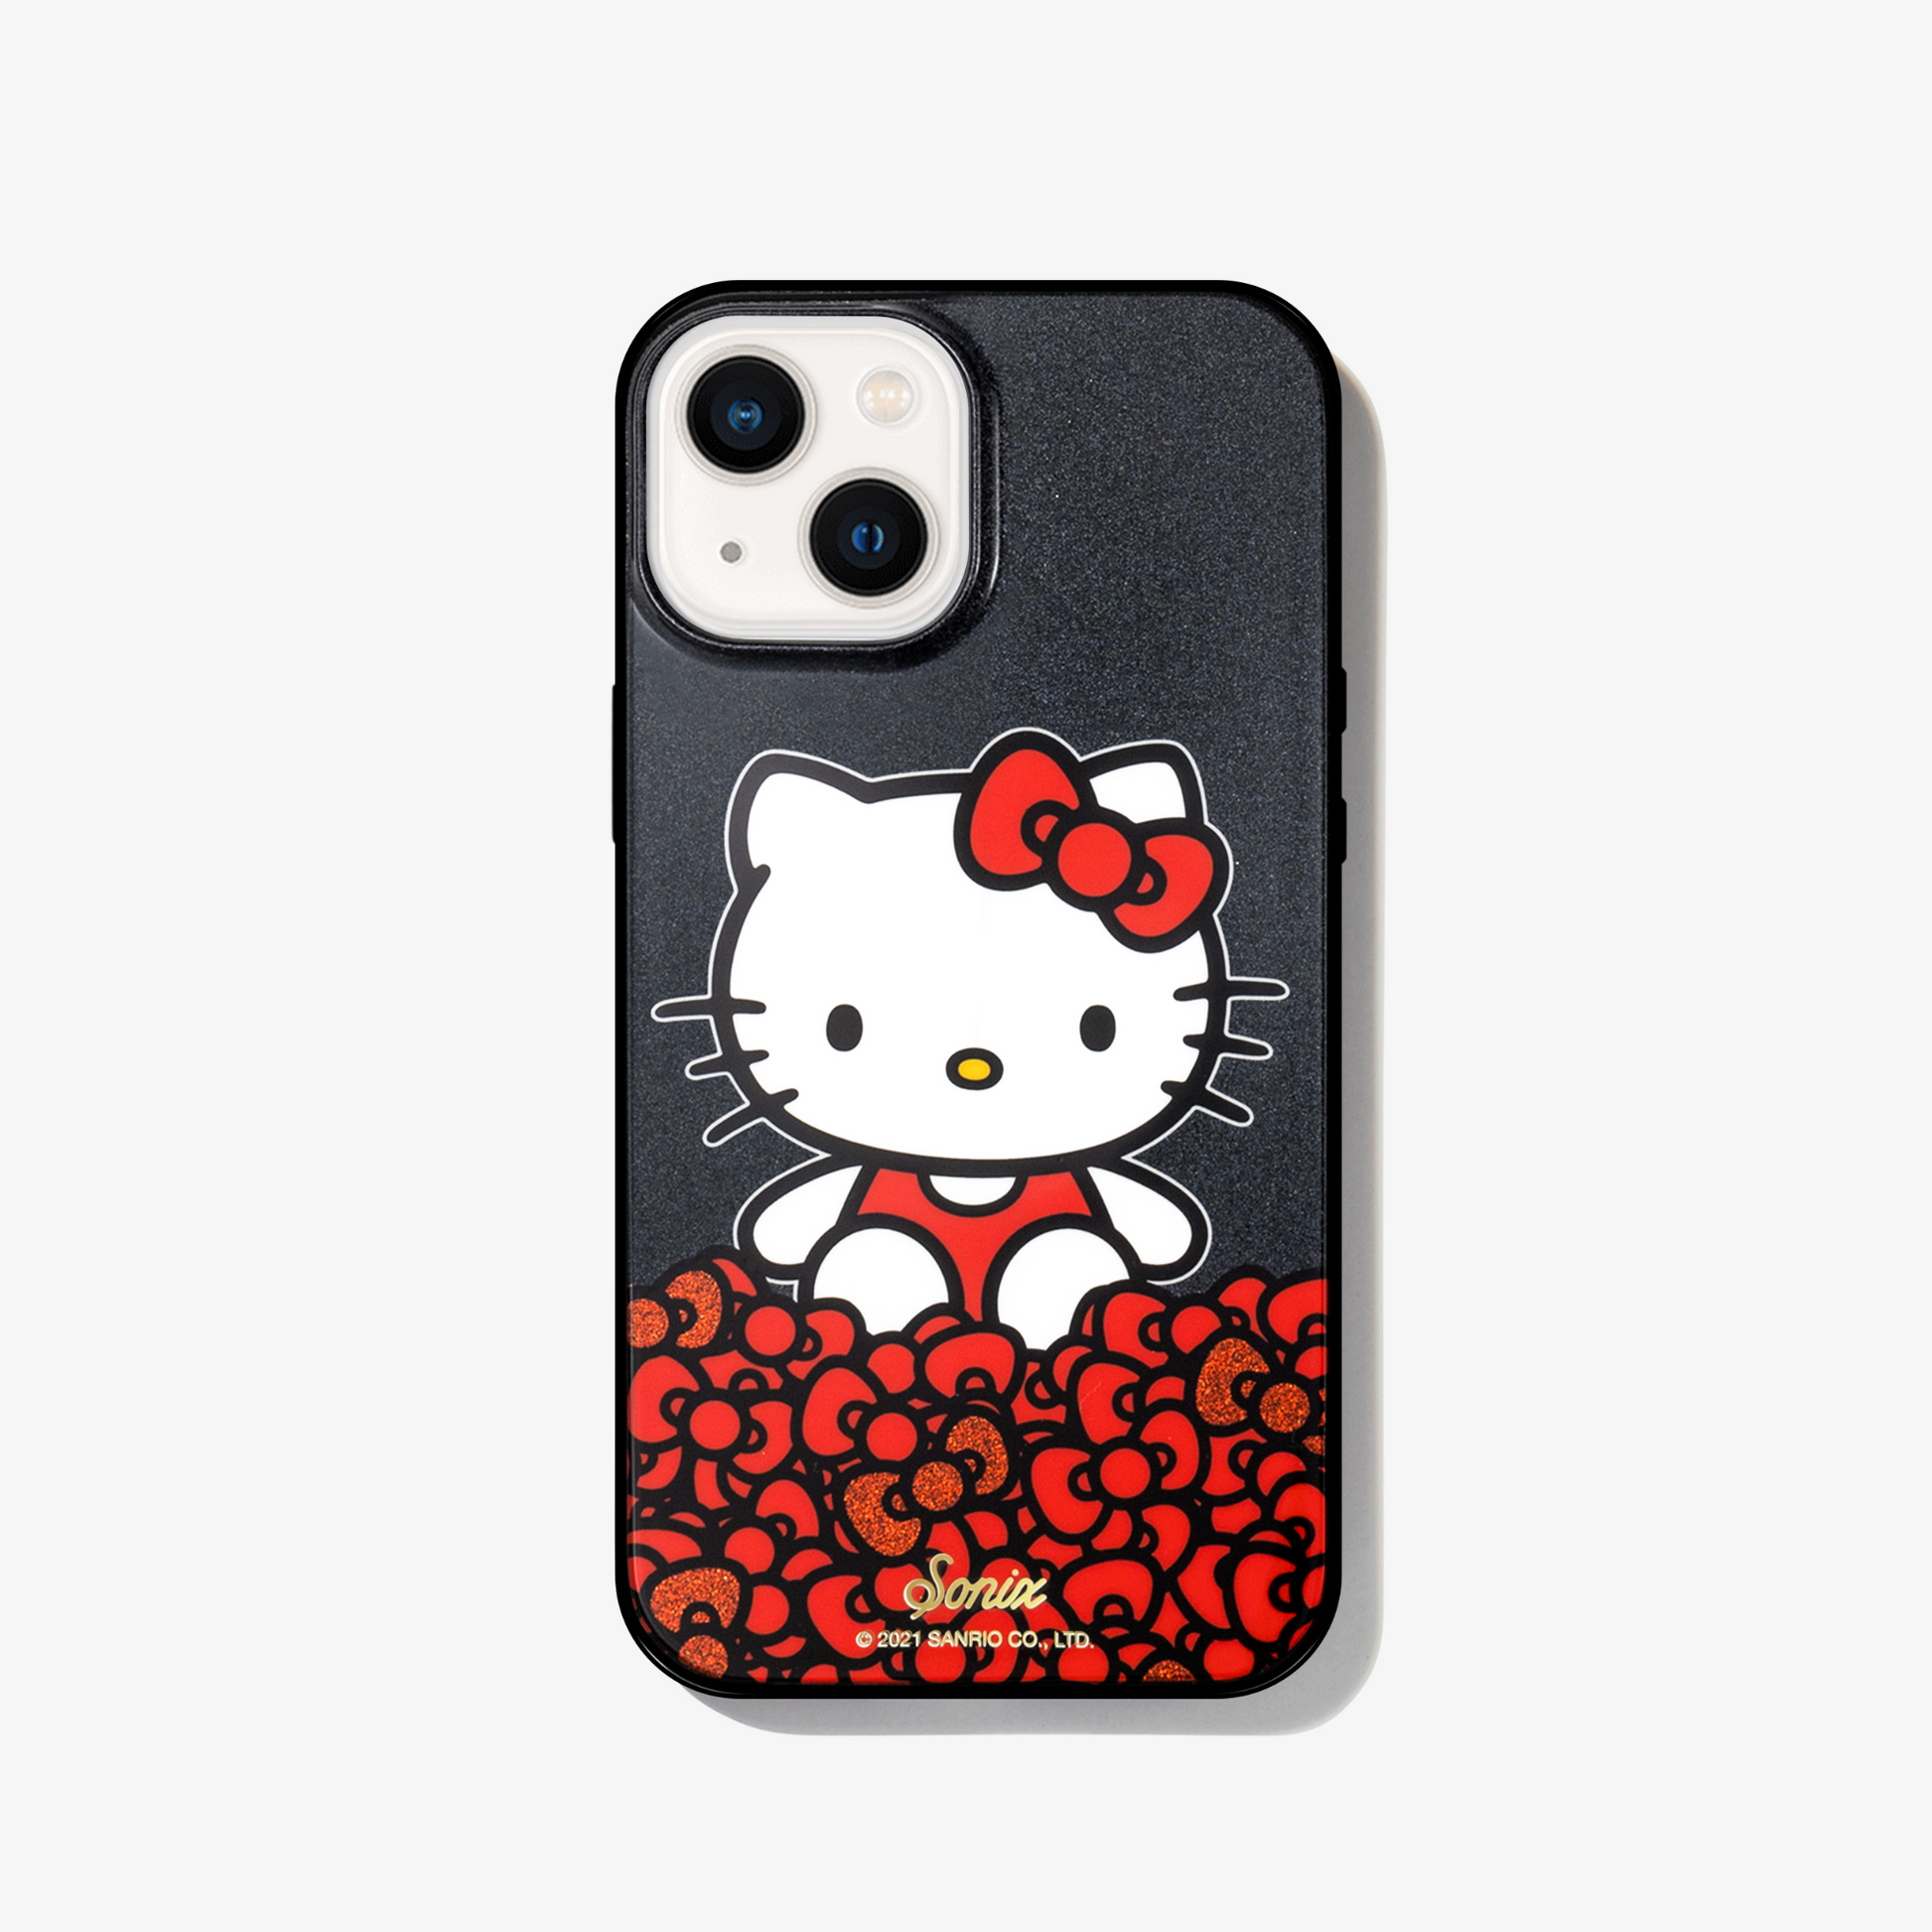 black glitter and Hello Kitty sitting on a bundle of her iconic red bows shown on a iphone 13